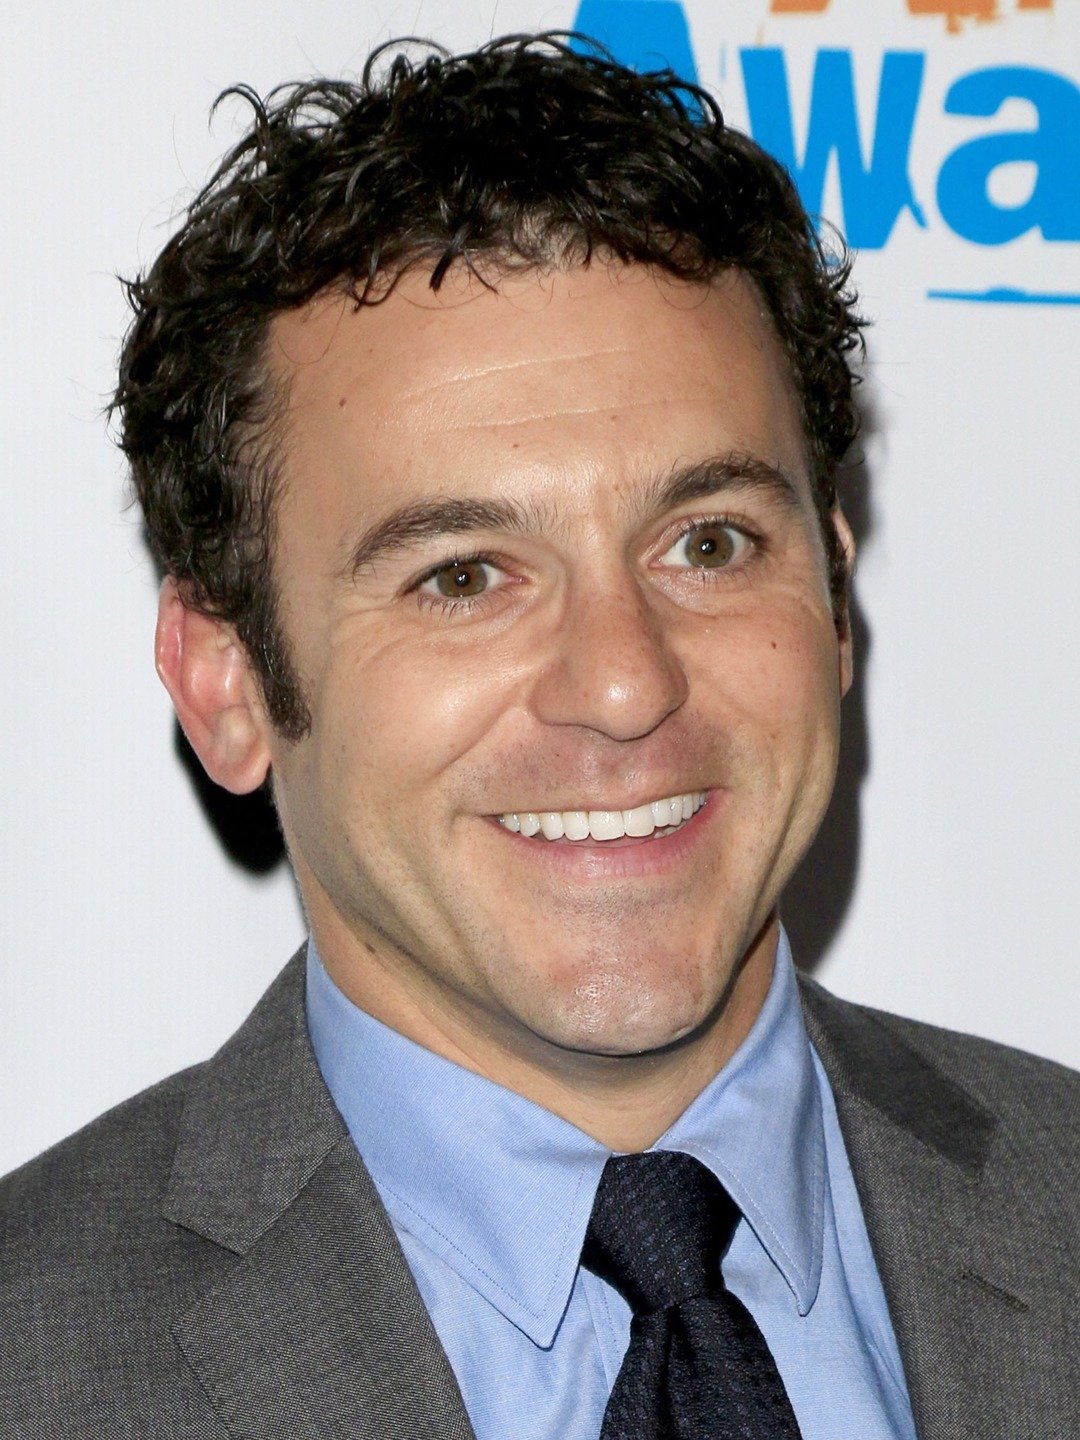 How tall is Fred Savage?